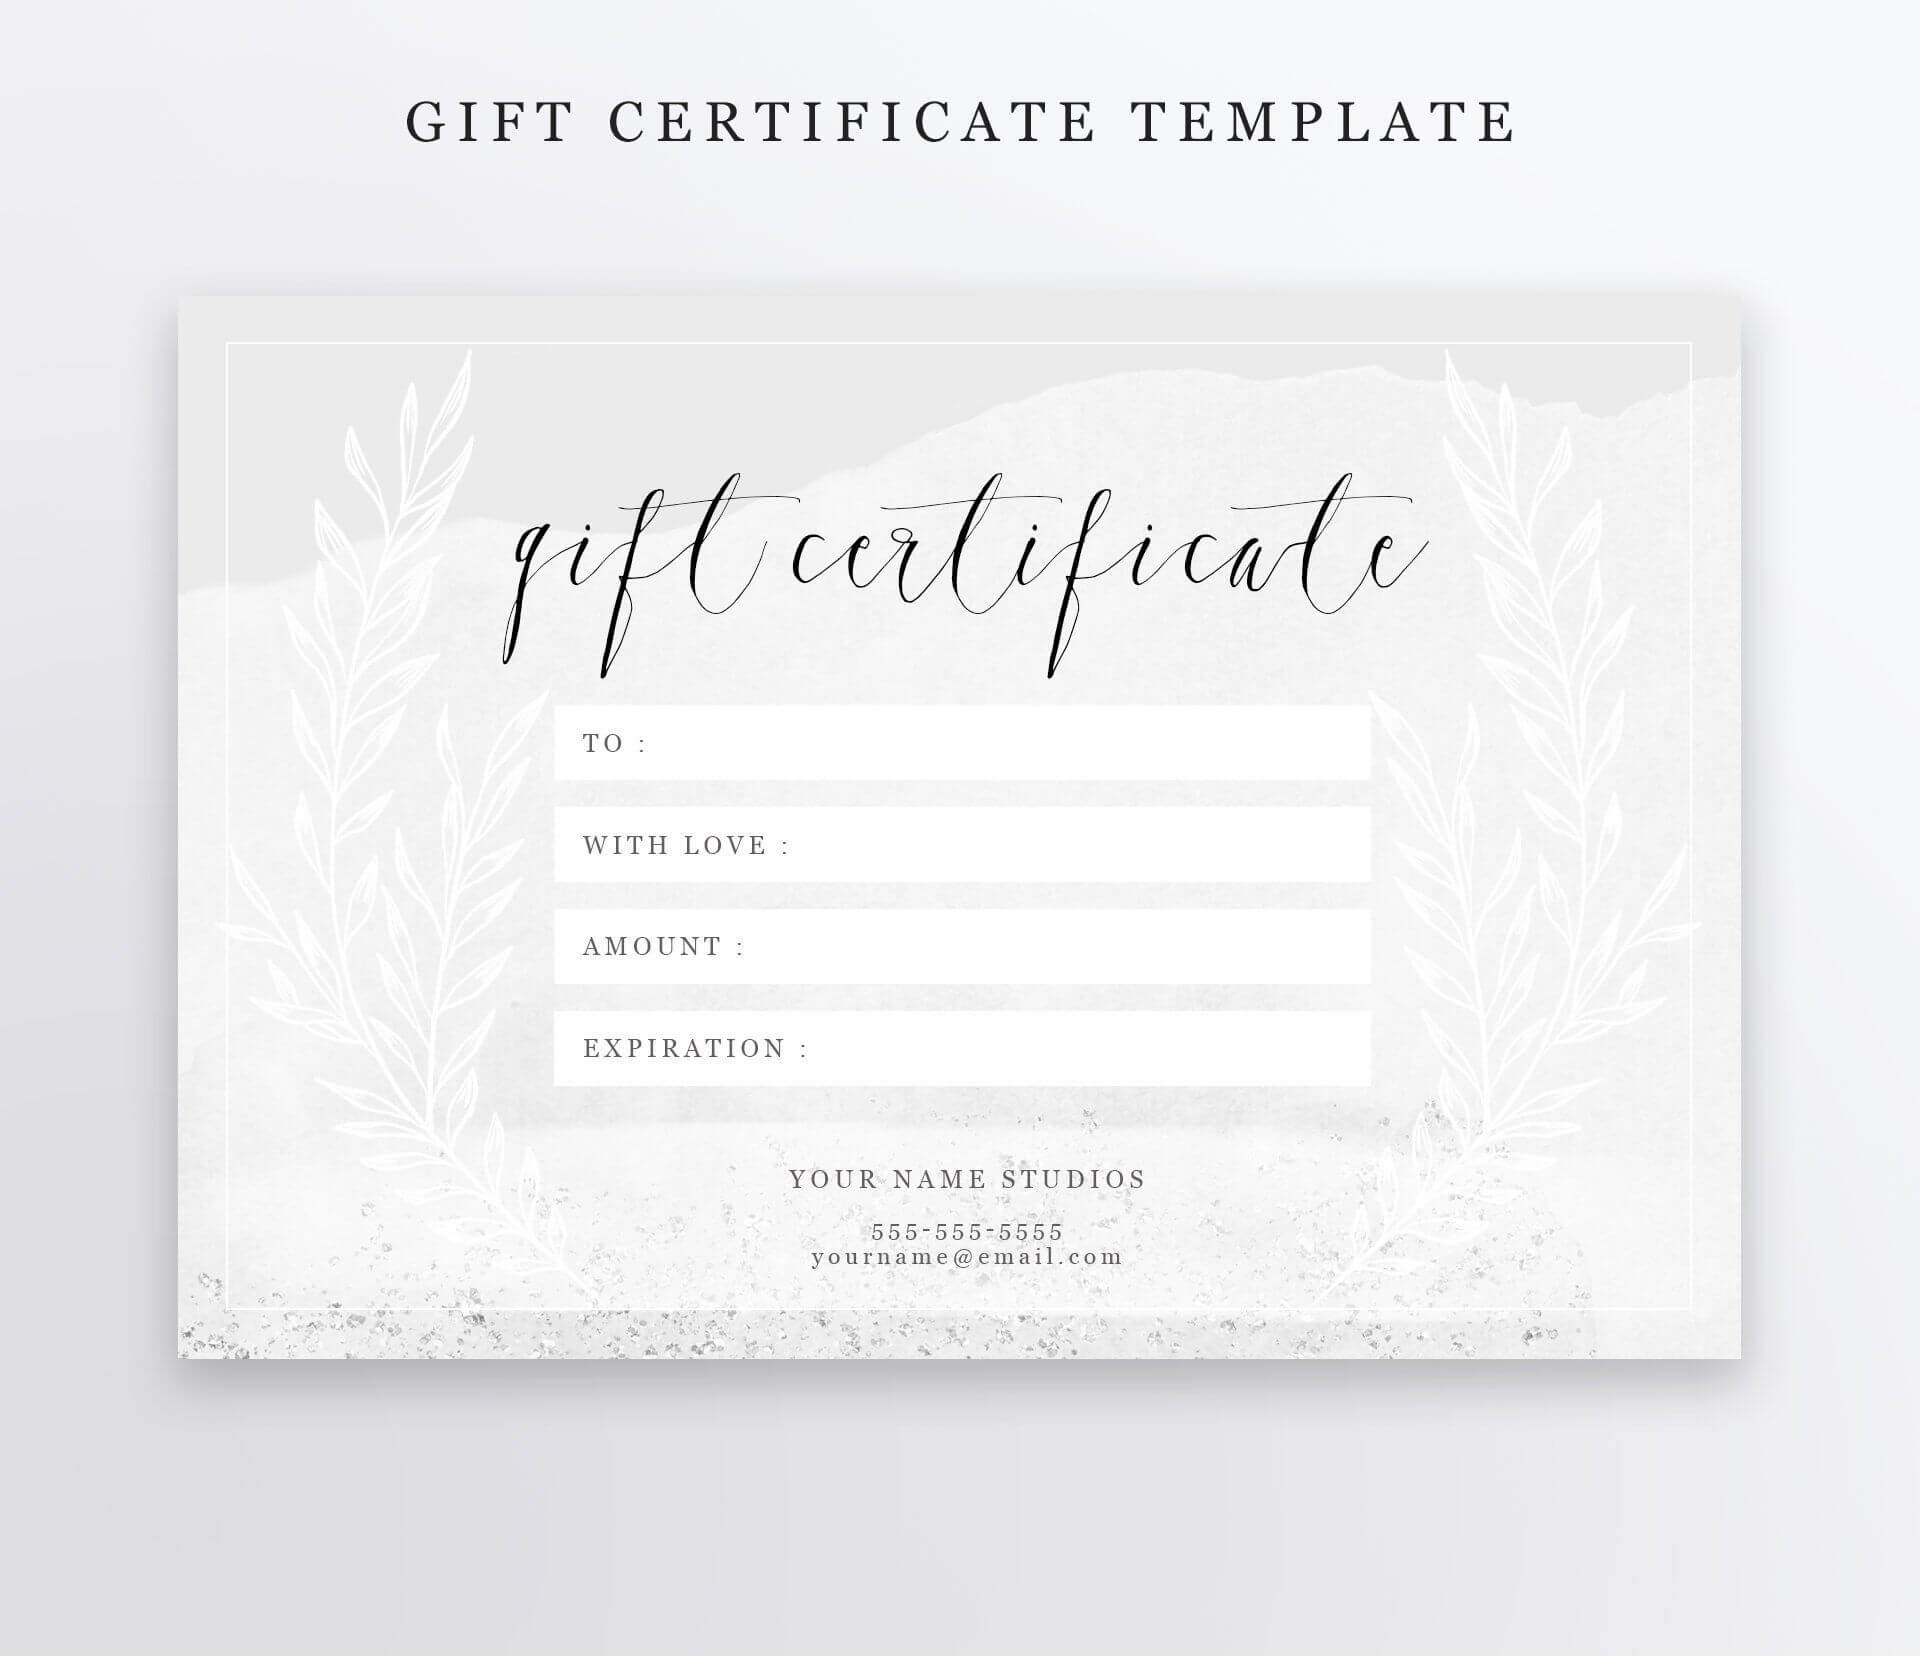 Photography Gift Certificate Template – Psd 4X6 – Editable Within Gift Certificate Template Photoshop